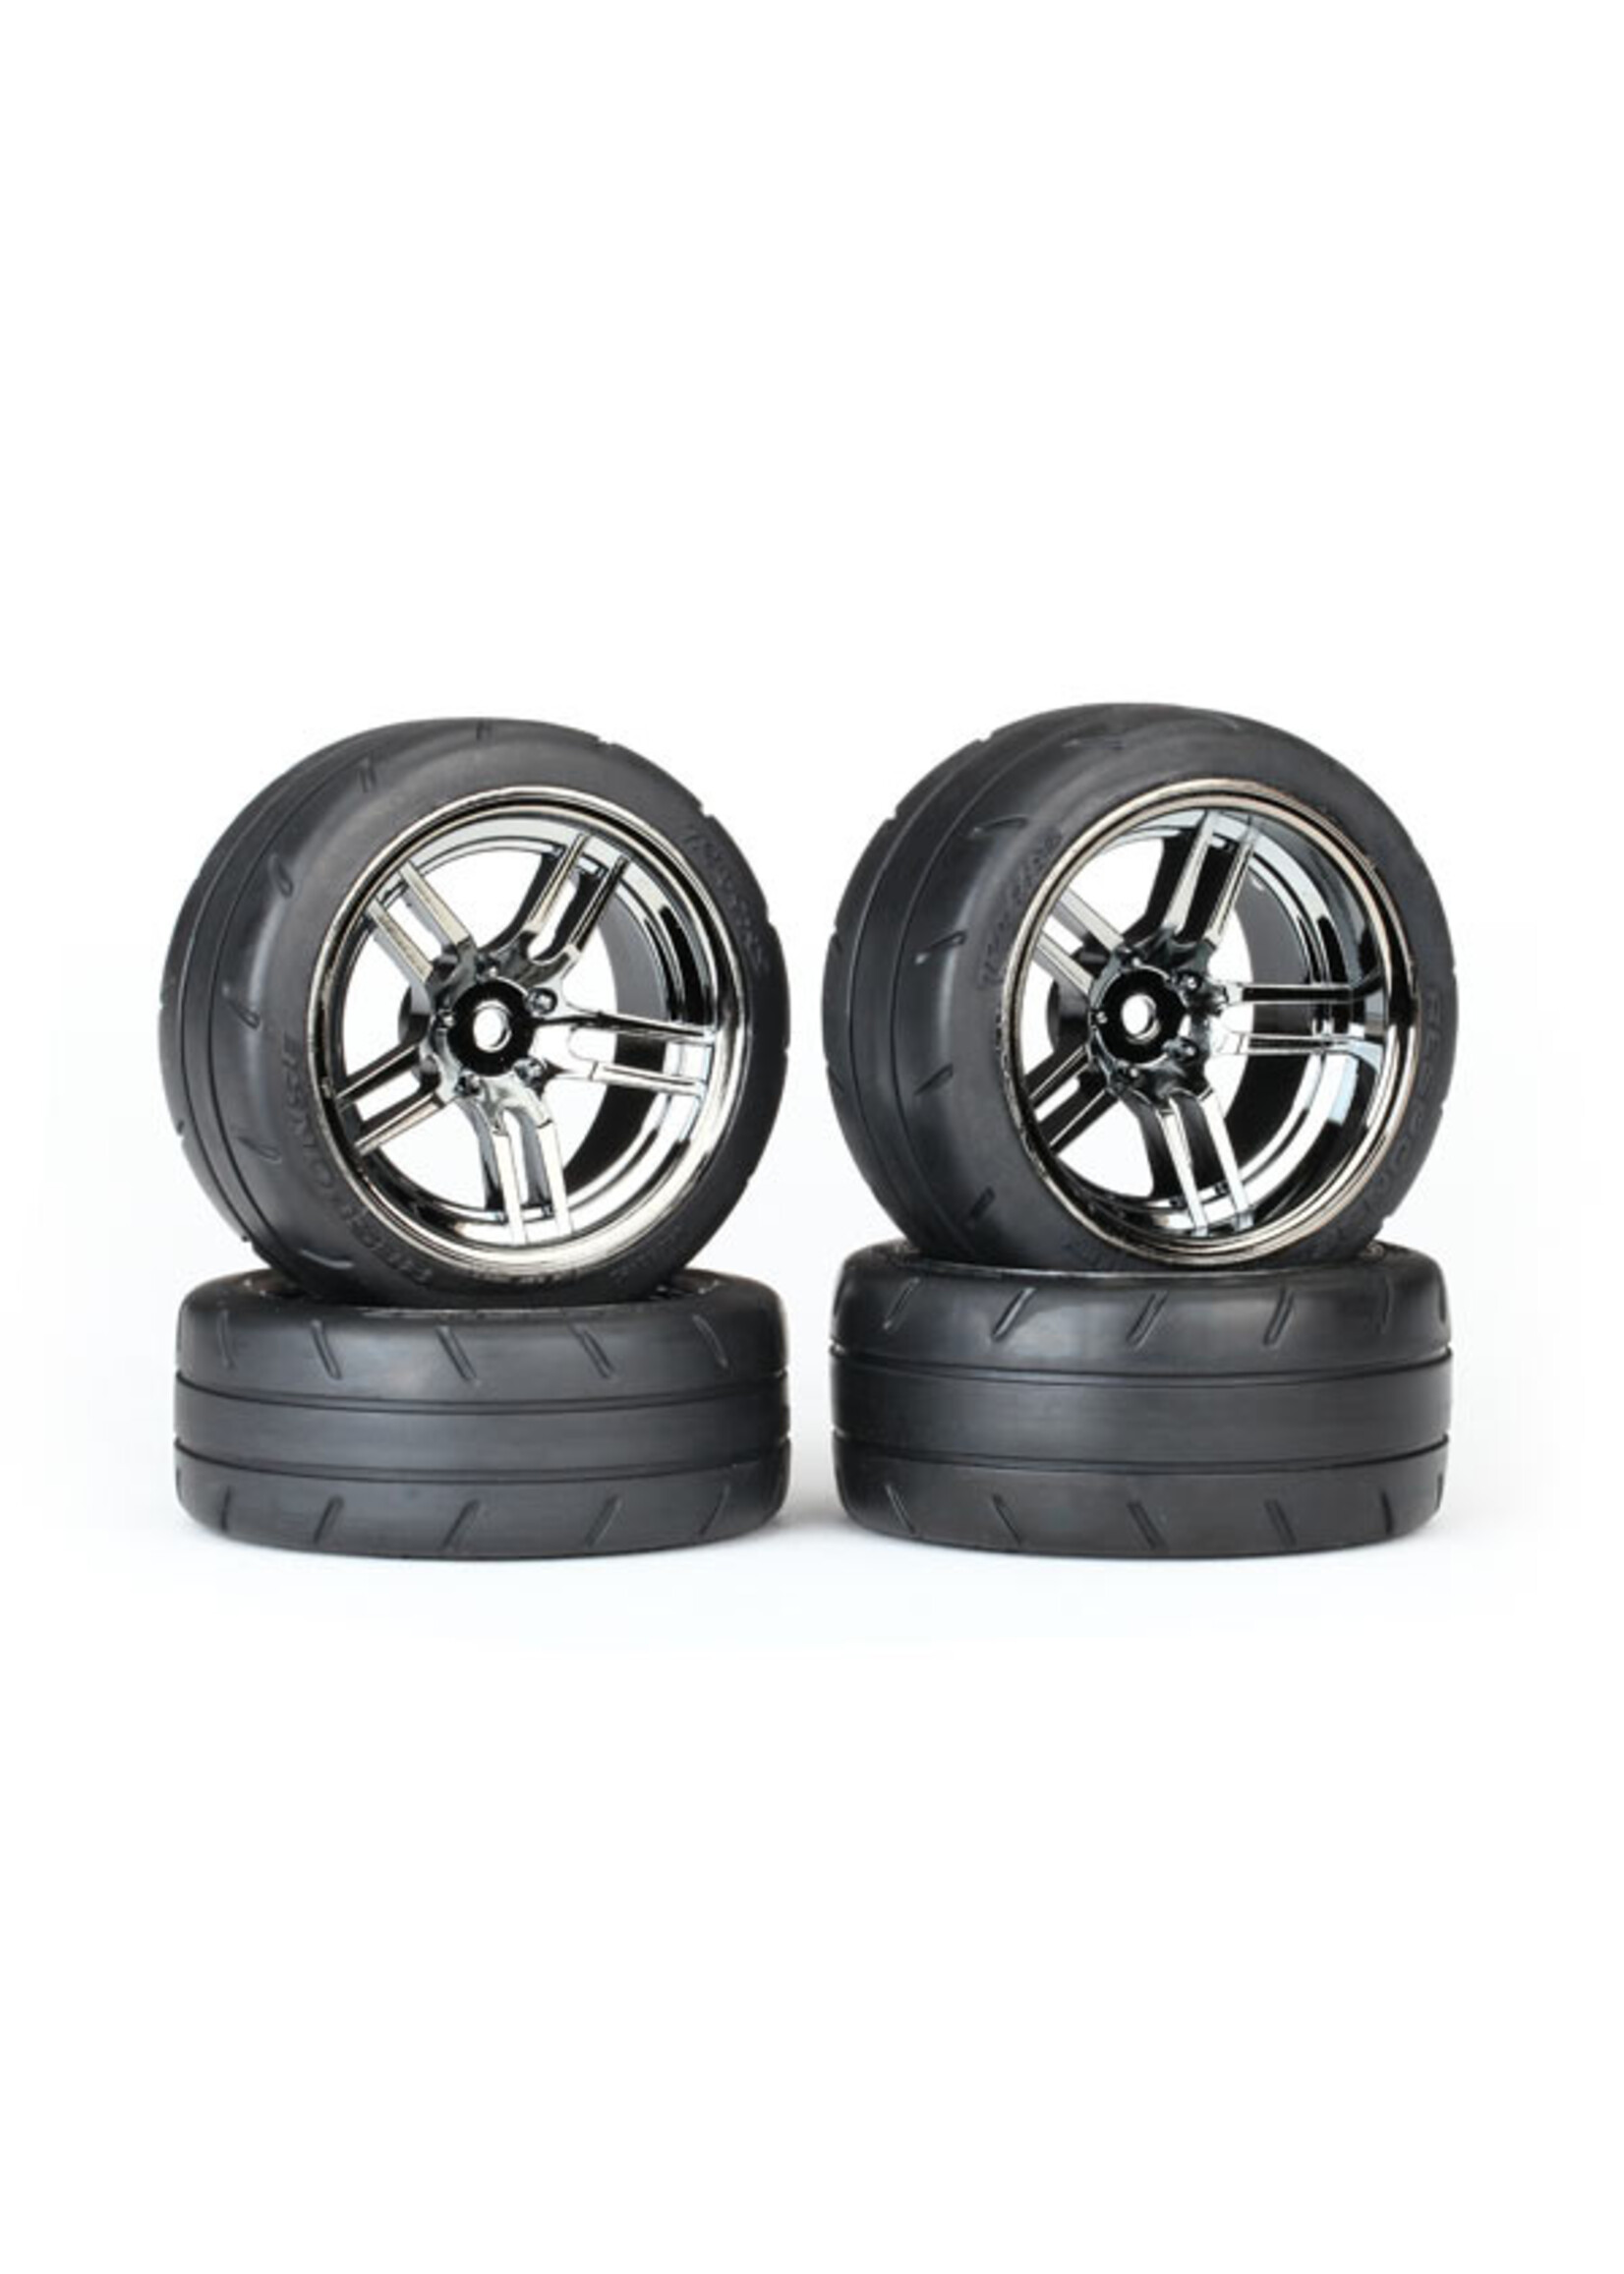 Traxxas TRA8375 Traxxas Tires & wheels, assembled, glued (split-spoke black chrome wheels, 1.9' Response tires, foam inserts) (front (2), rear (extra wide) (2)) (VXL rated)